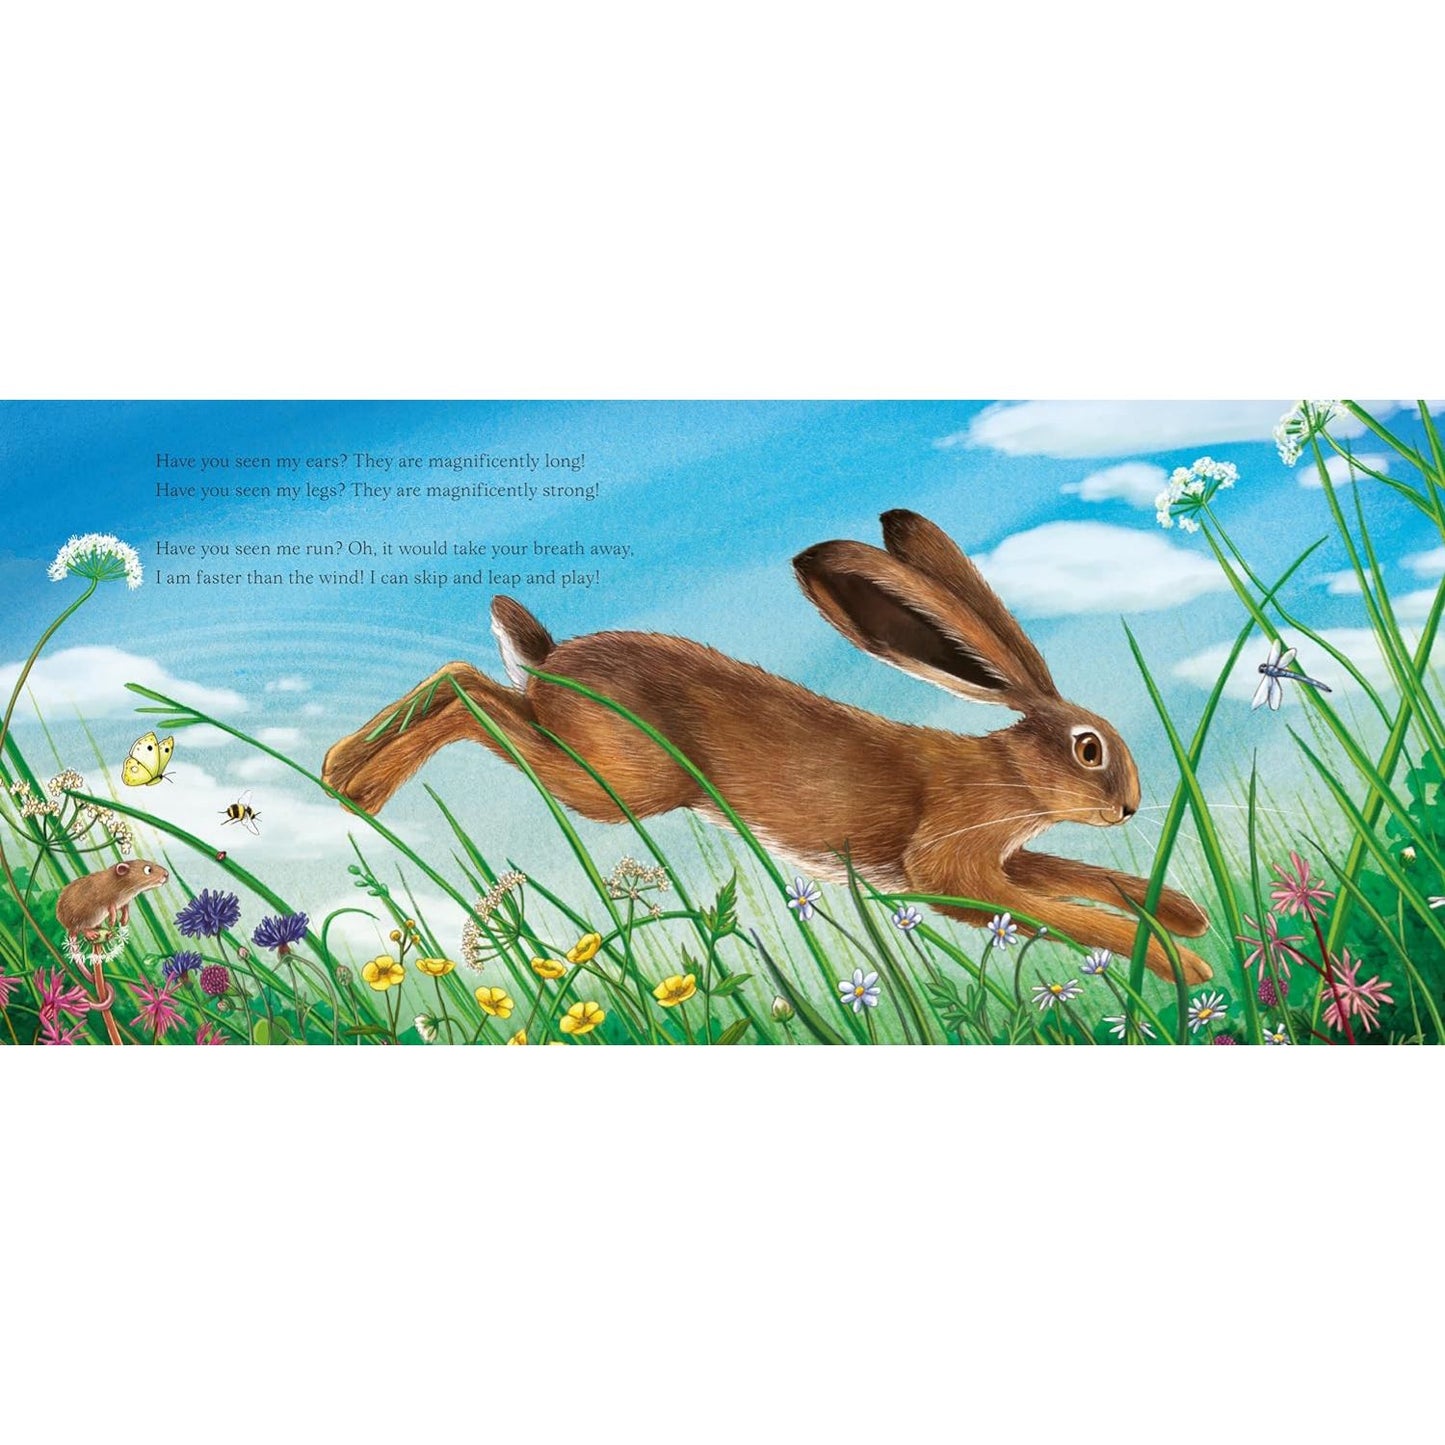 I am Hattie the Hare: A Tale from Our Wild and Wonderful Meadows | Hardcover | Children’s Book on Nature